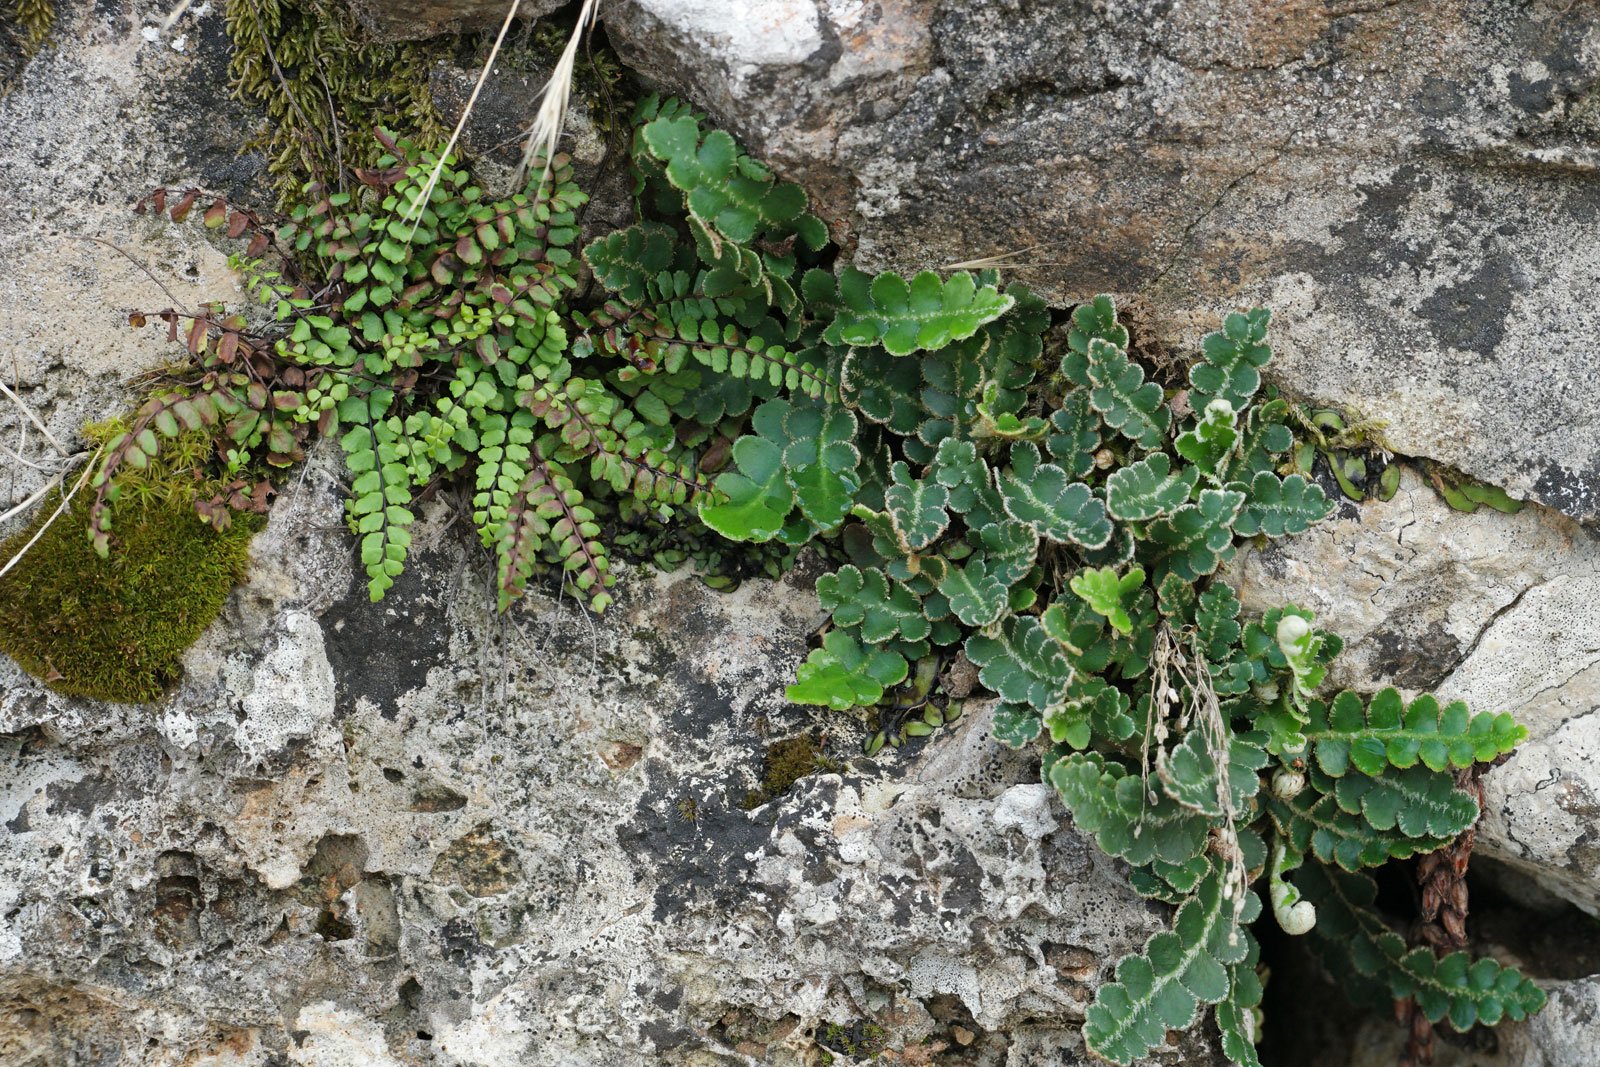 Available asplenium ceterach off or Stone cutter Slab cutter 2 Plants $18,00 